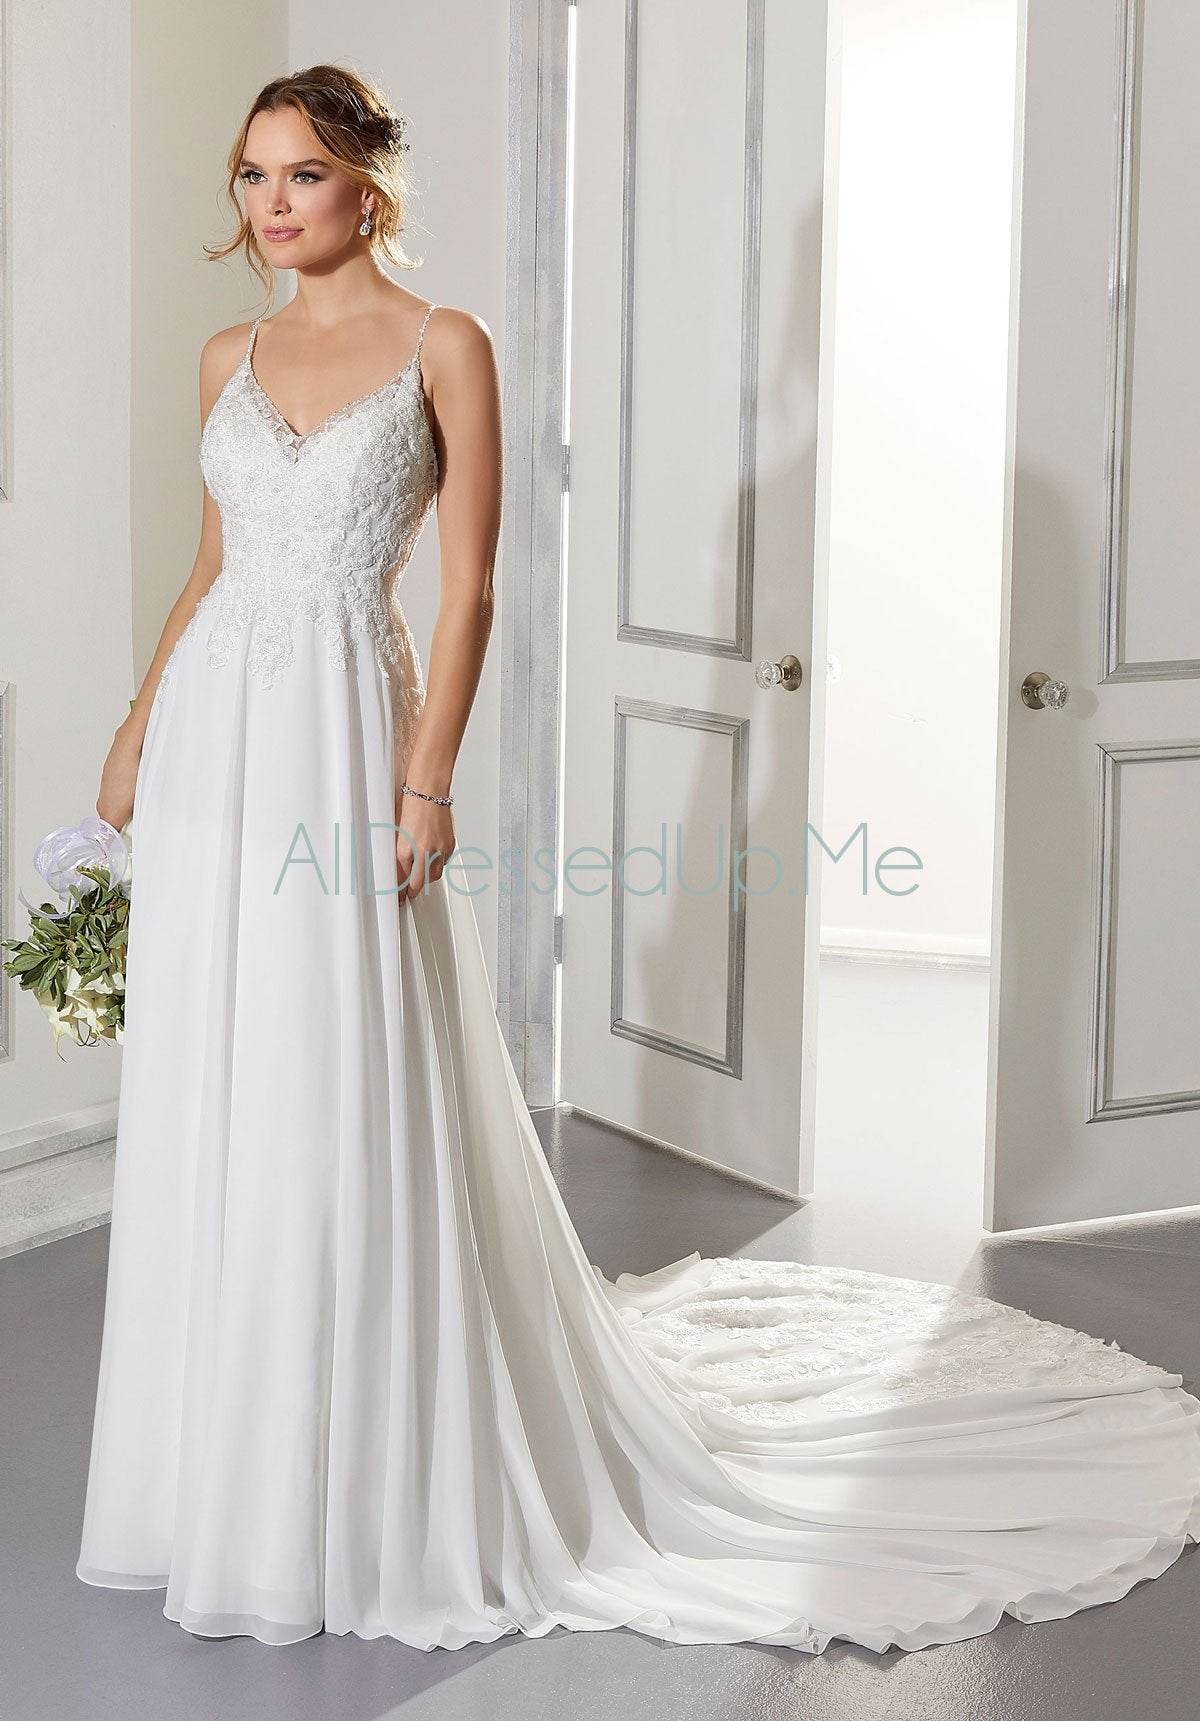 Blu - Ailani - 5873 - Cheron's Bridal, Wedding Gown - Morilee Blu - - Wedding Gowns Dresses Chattanooga Hixson Shops Boutiques Tennessee TN Georgia GA MSRP Lowest Prices Sale Discount